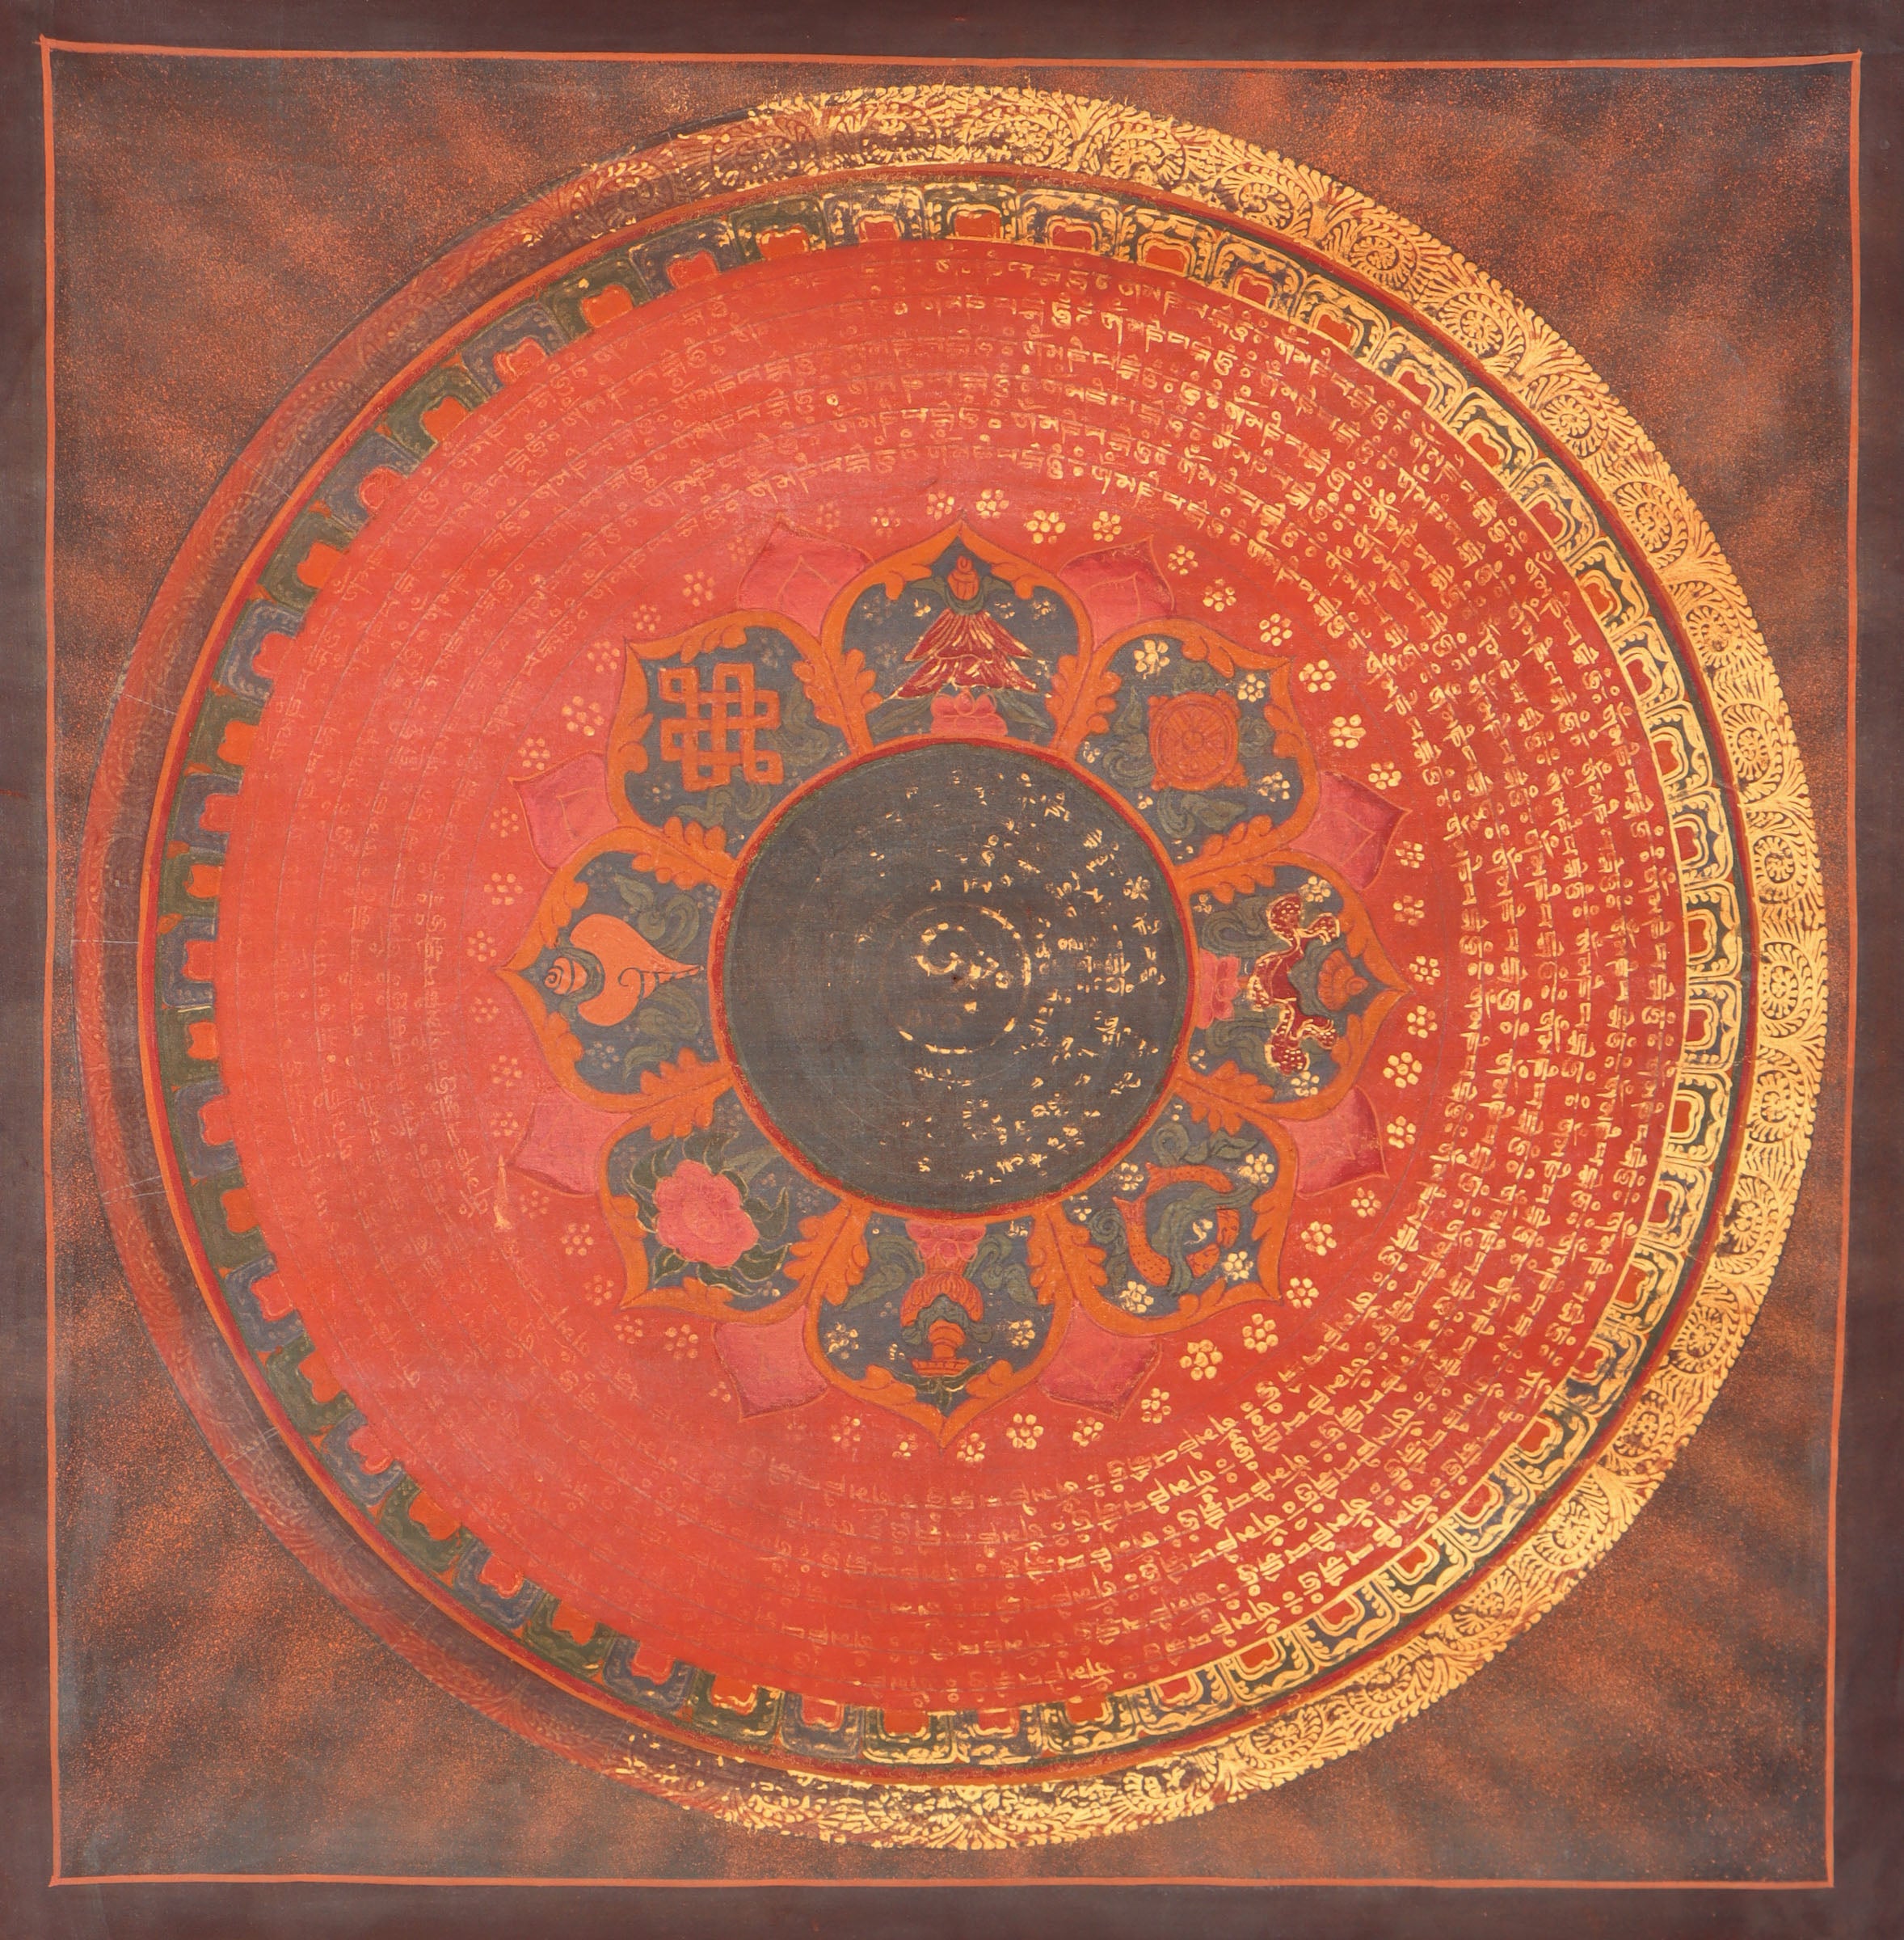 Antique Mantra Mandala Thangka Painting for religious rites and rituals.